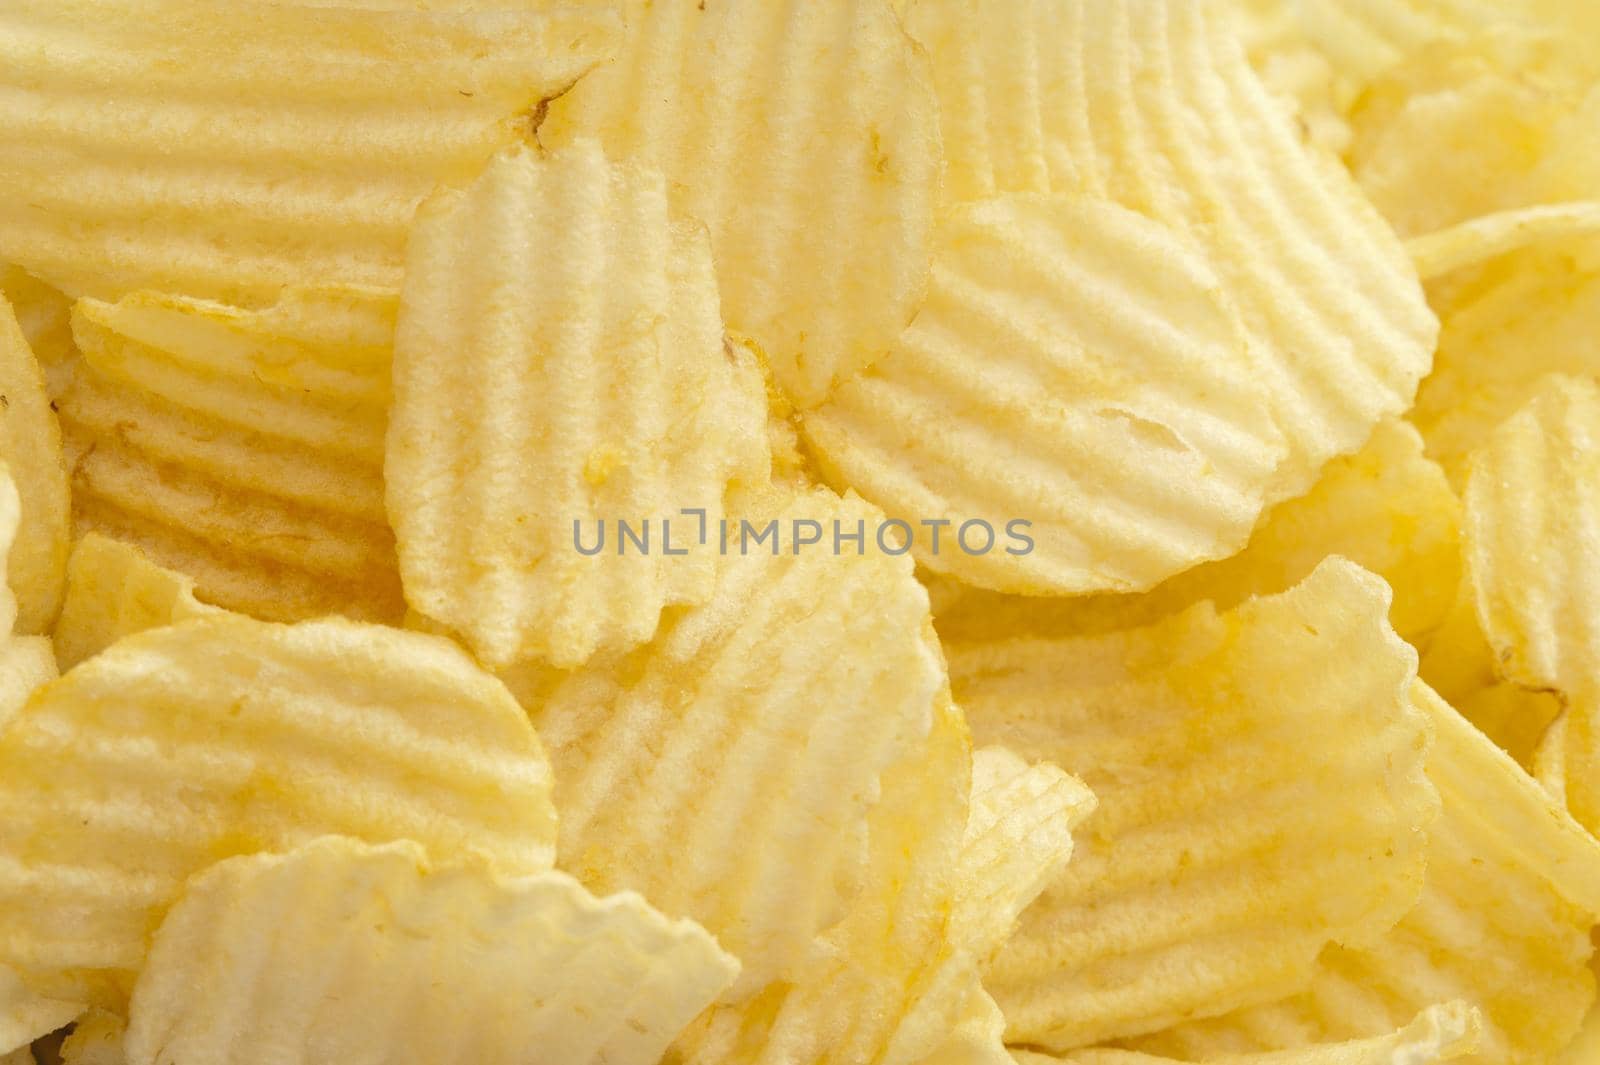 Delicious plain ruffled potato chips piled unceremoniously one atop another